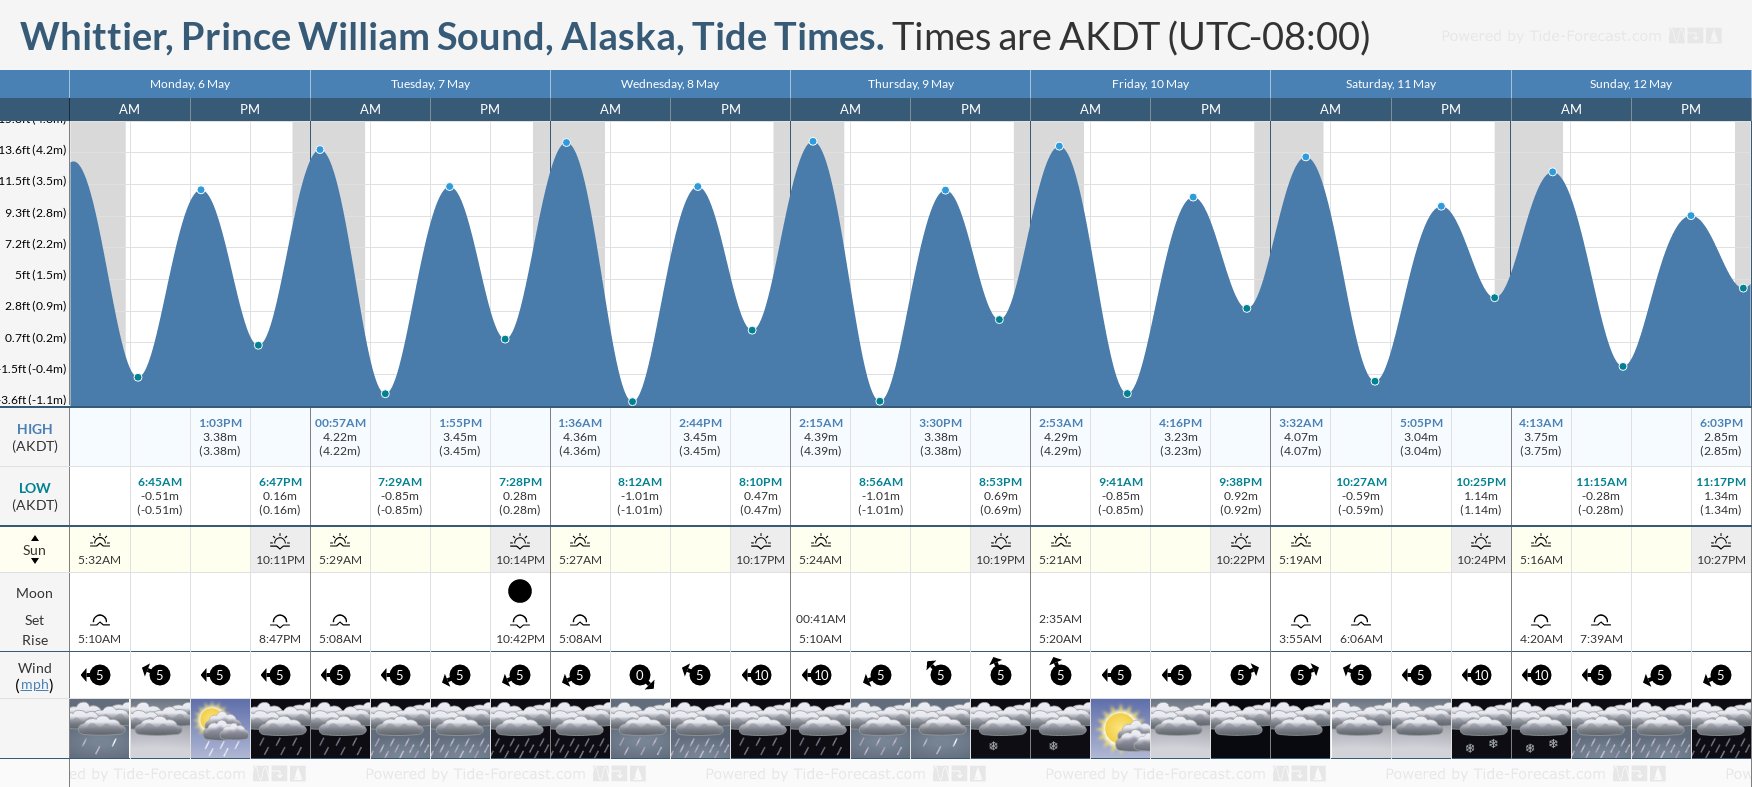 Whittier, Prince William Sound, Alaska Tide Chart including high and low tide tide times for the next 7 days